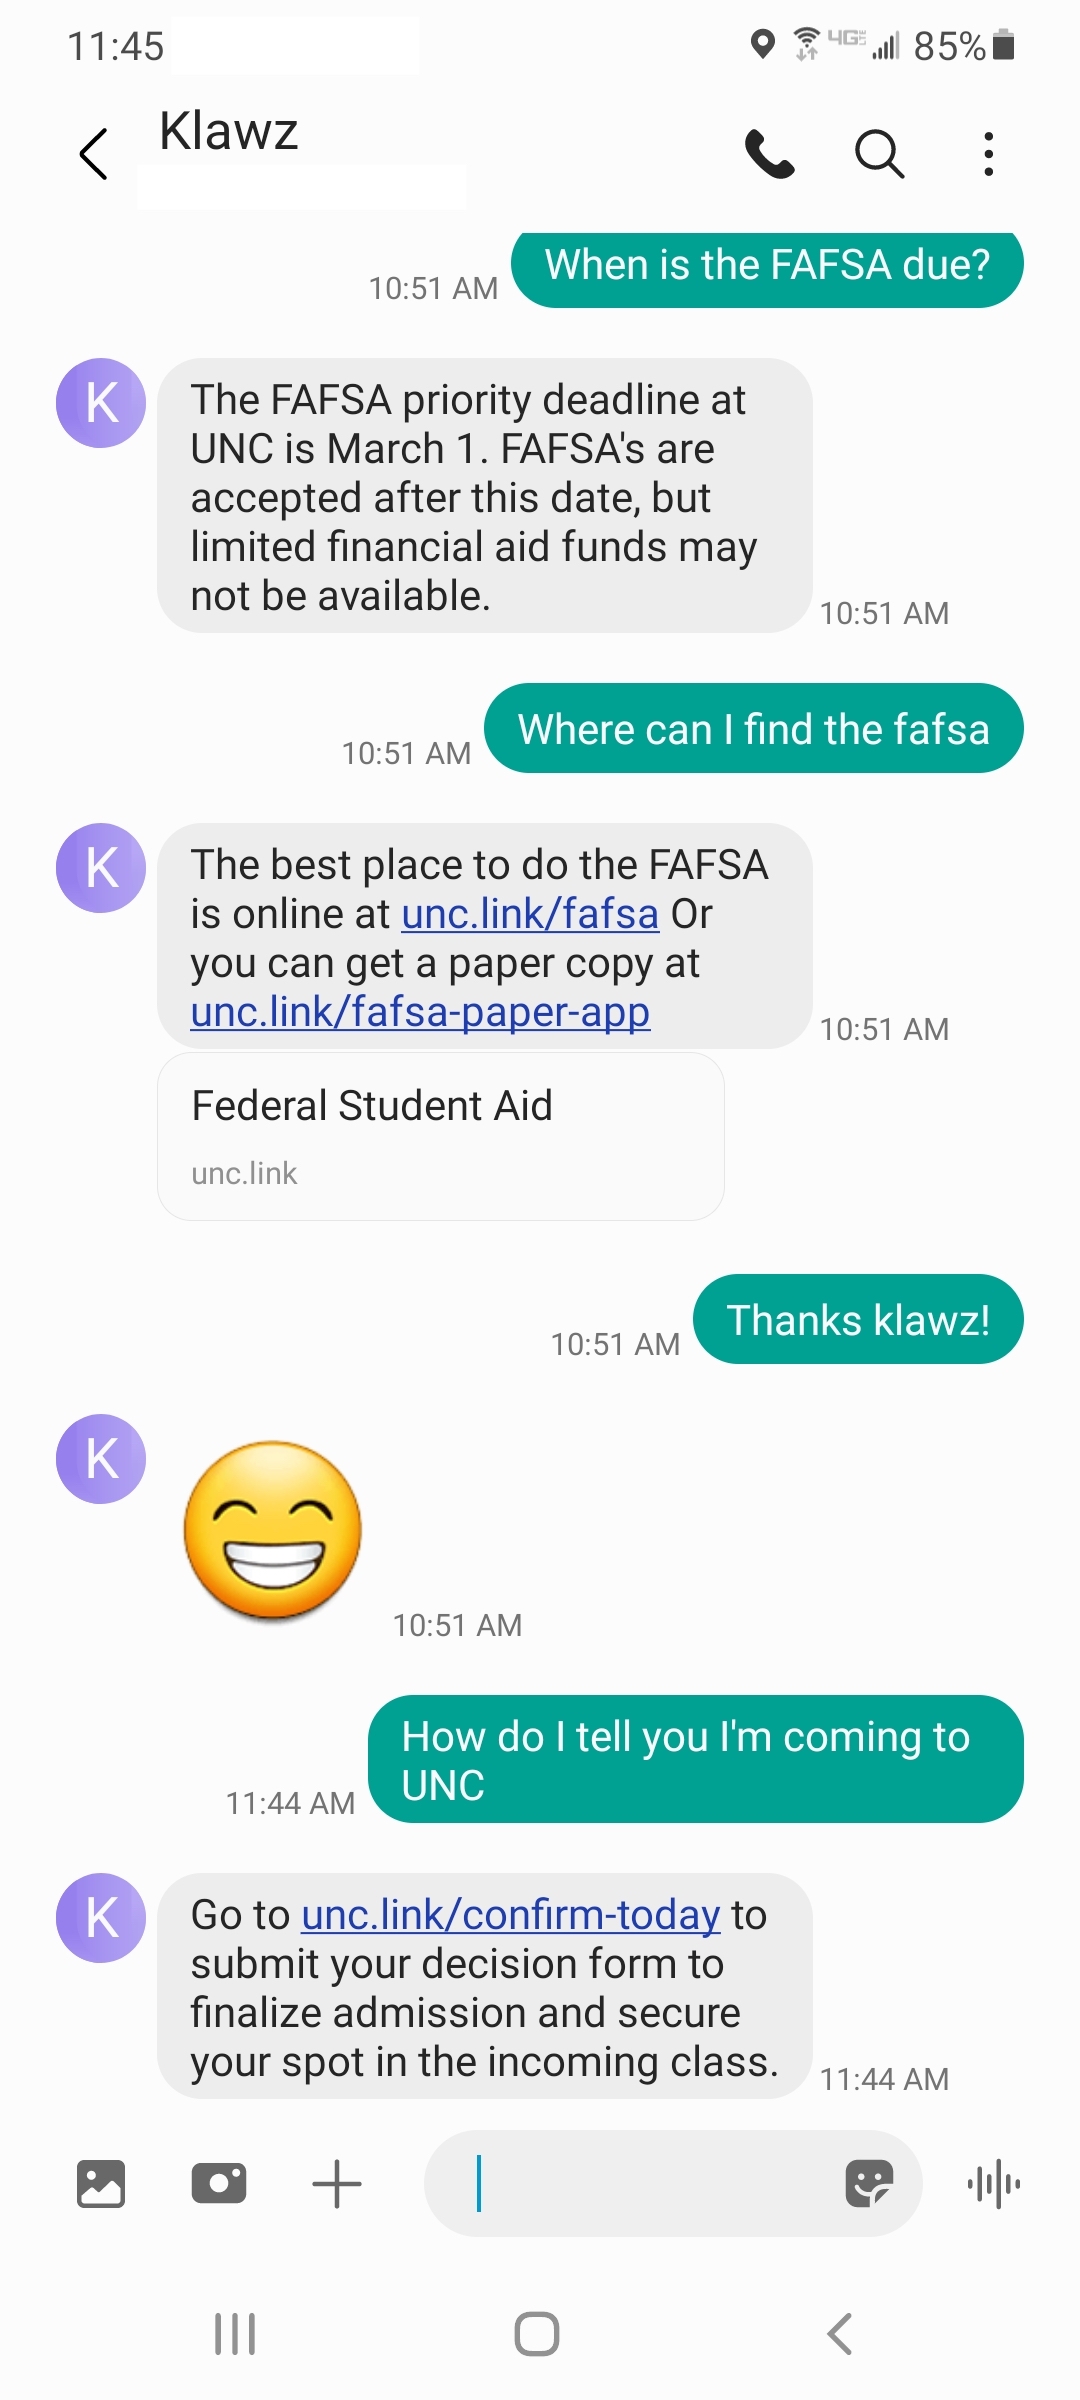 An example of the Klawz Chatbot in action, answering questions about the FAFSA